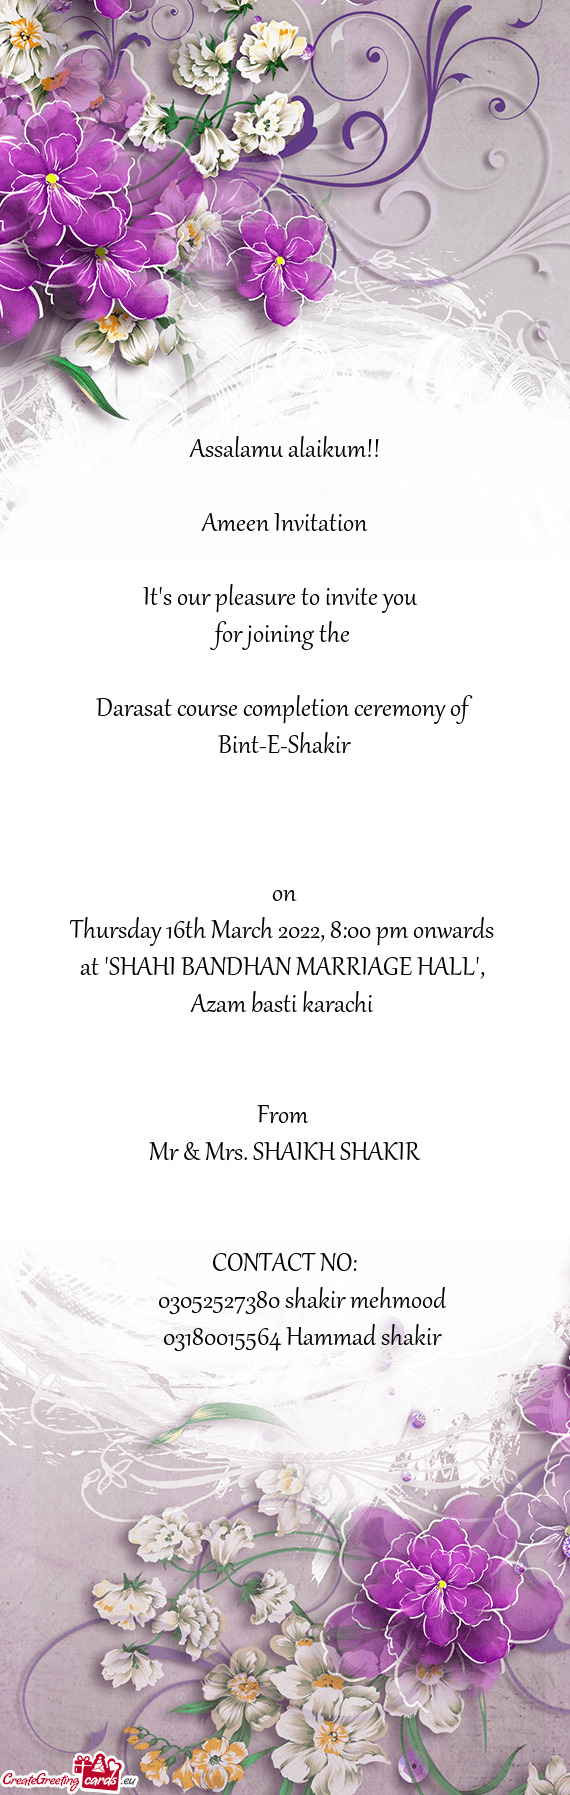 Darasat course completion ceremony of Bint-E-Shakir